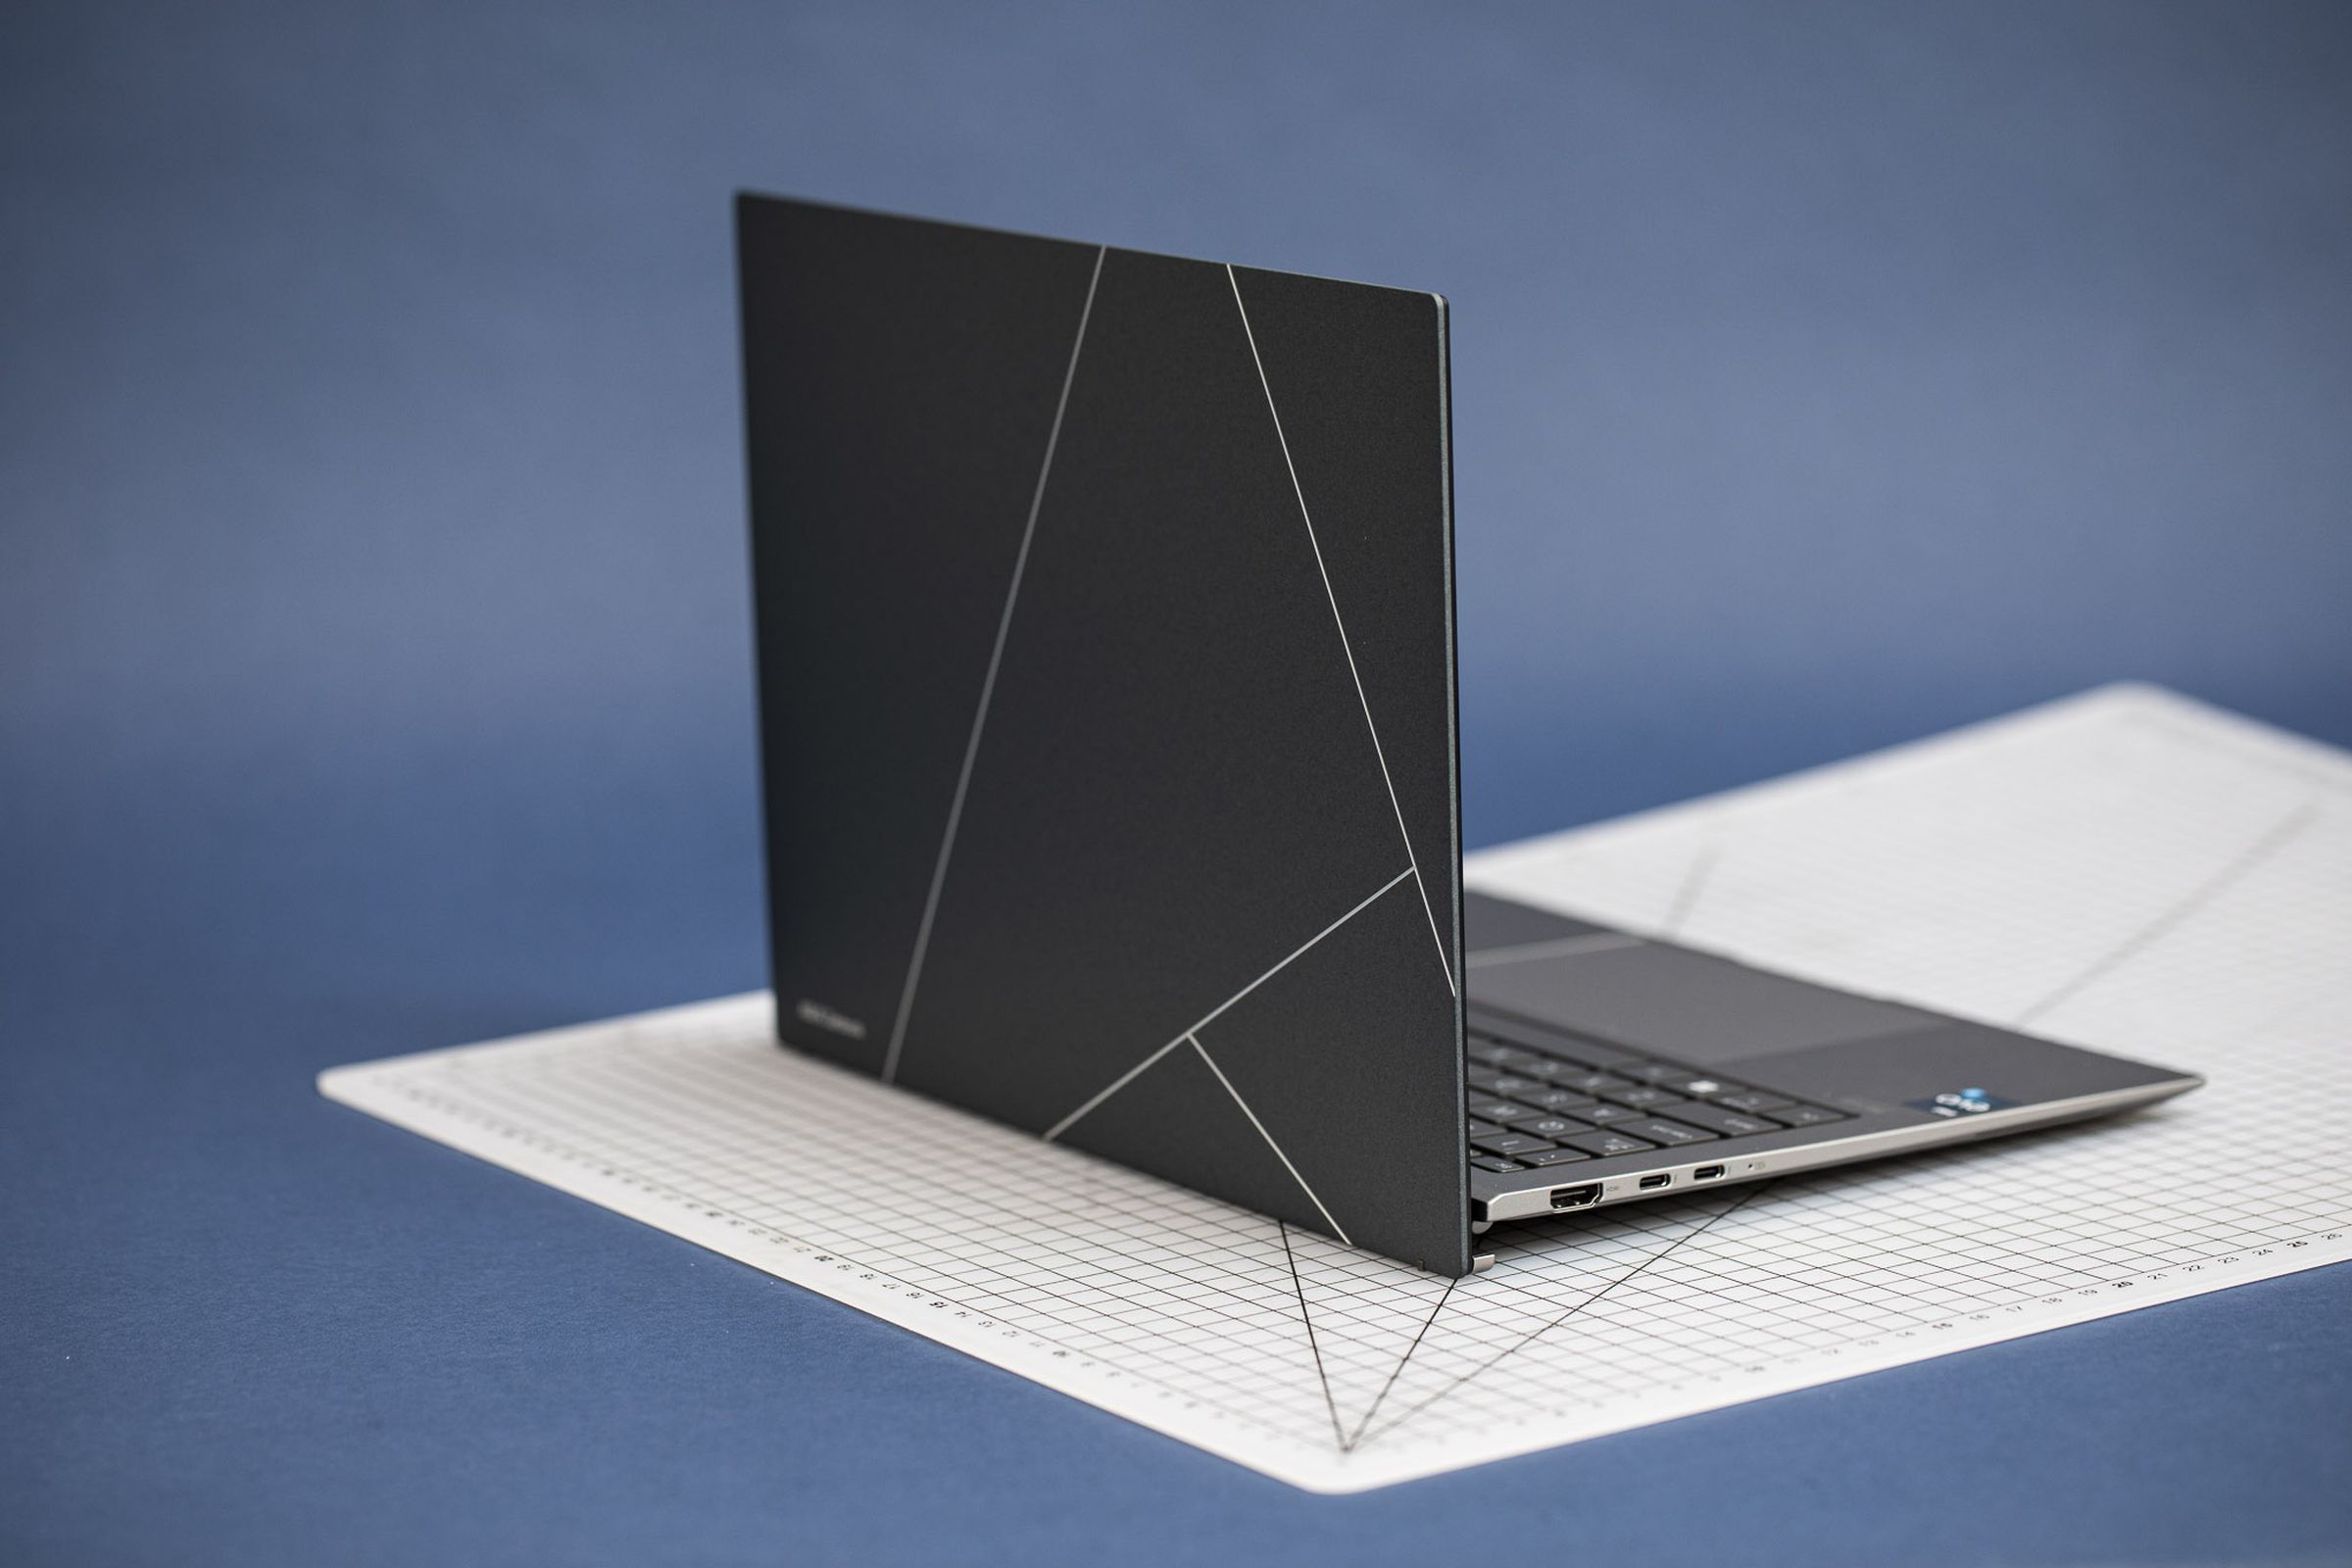 The Asus Zenbook S 13 OLED seen from the back right.